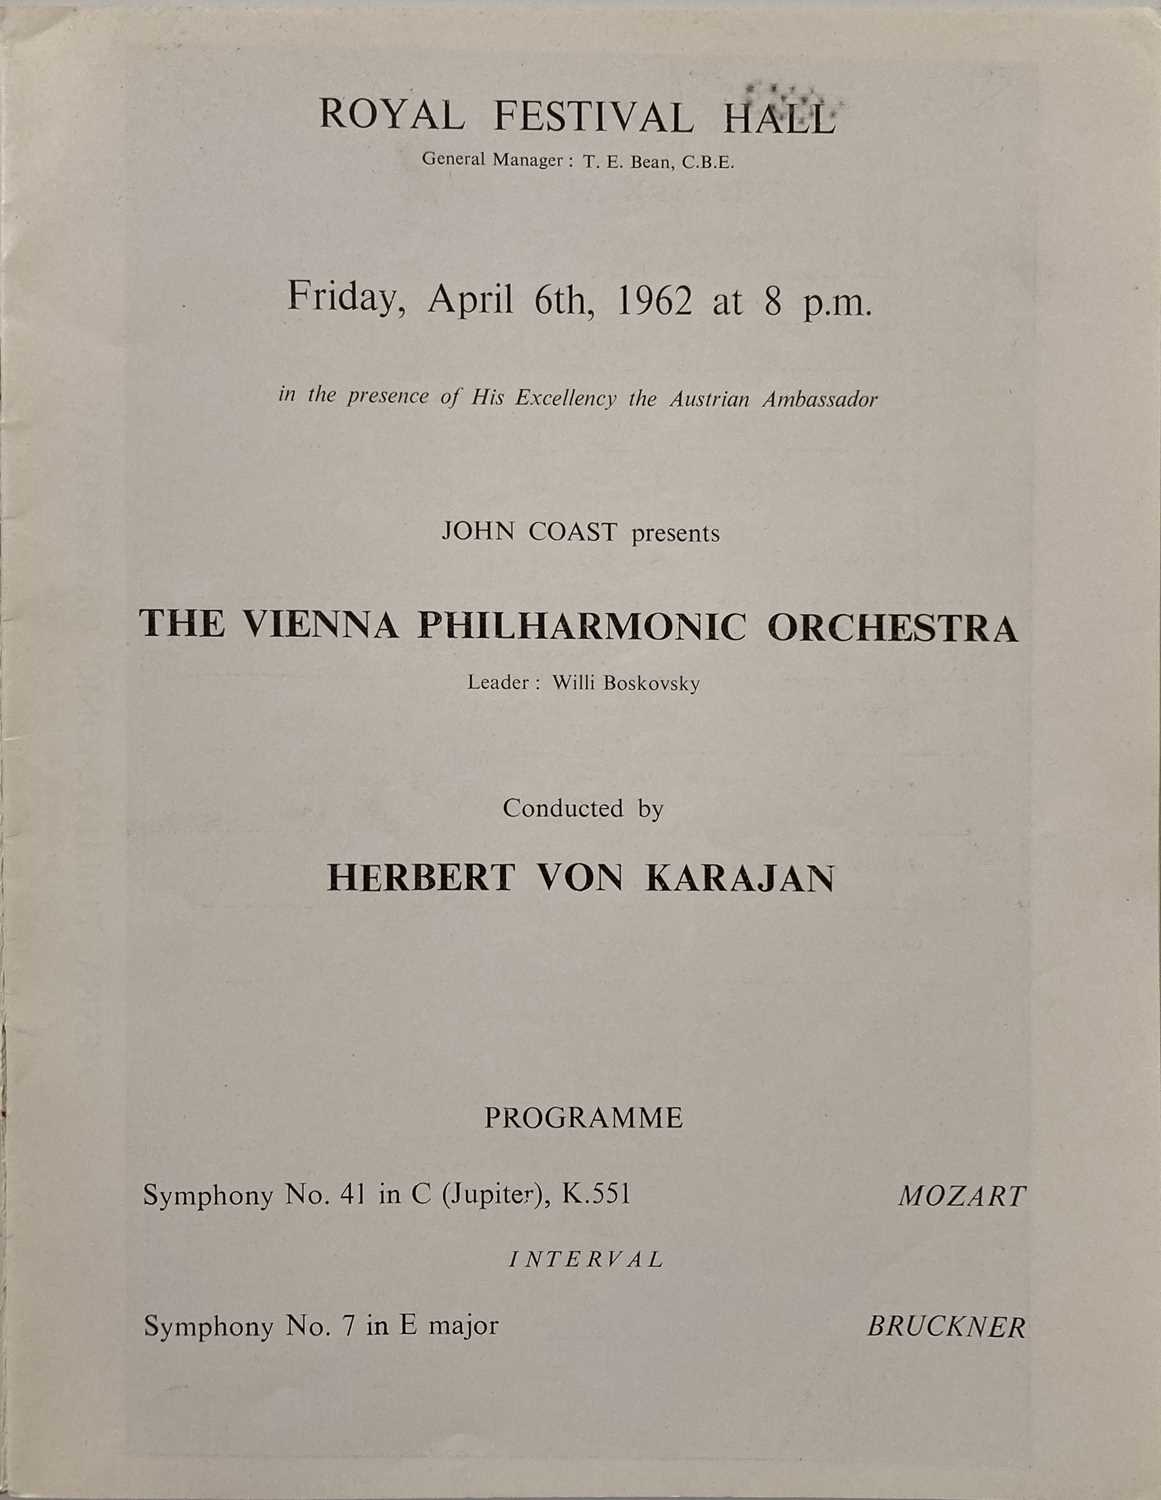 CLASSICAL MUSIC - INTERNATIONAL ORCHESTRAS - CONCERT PROGRAMMES / POSTERS - Image 13 of 15